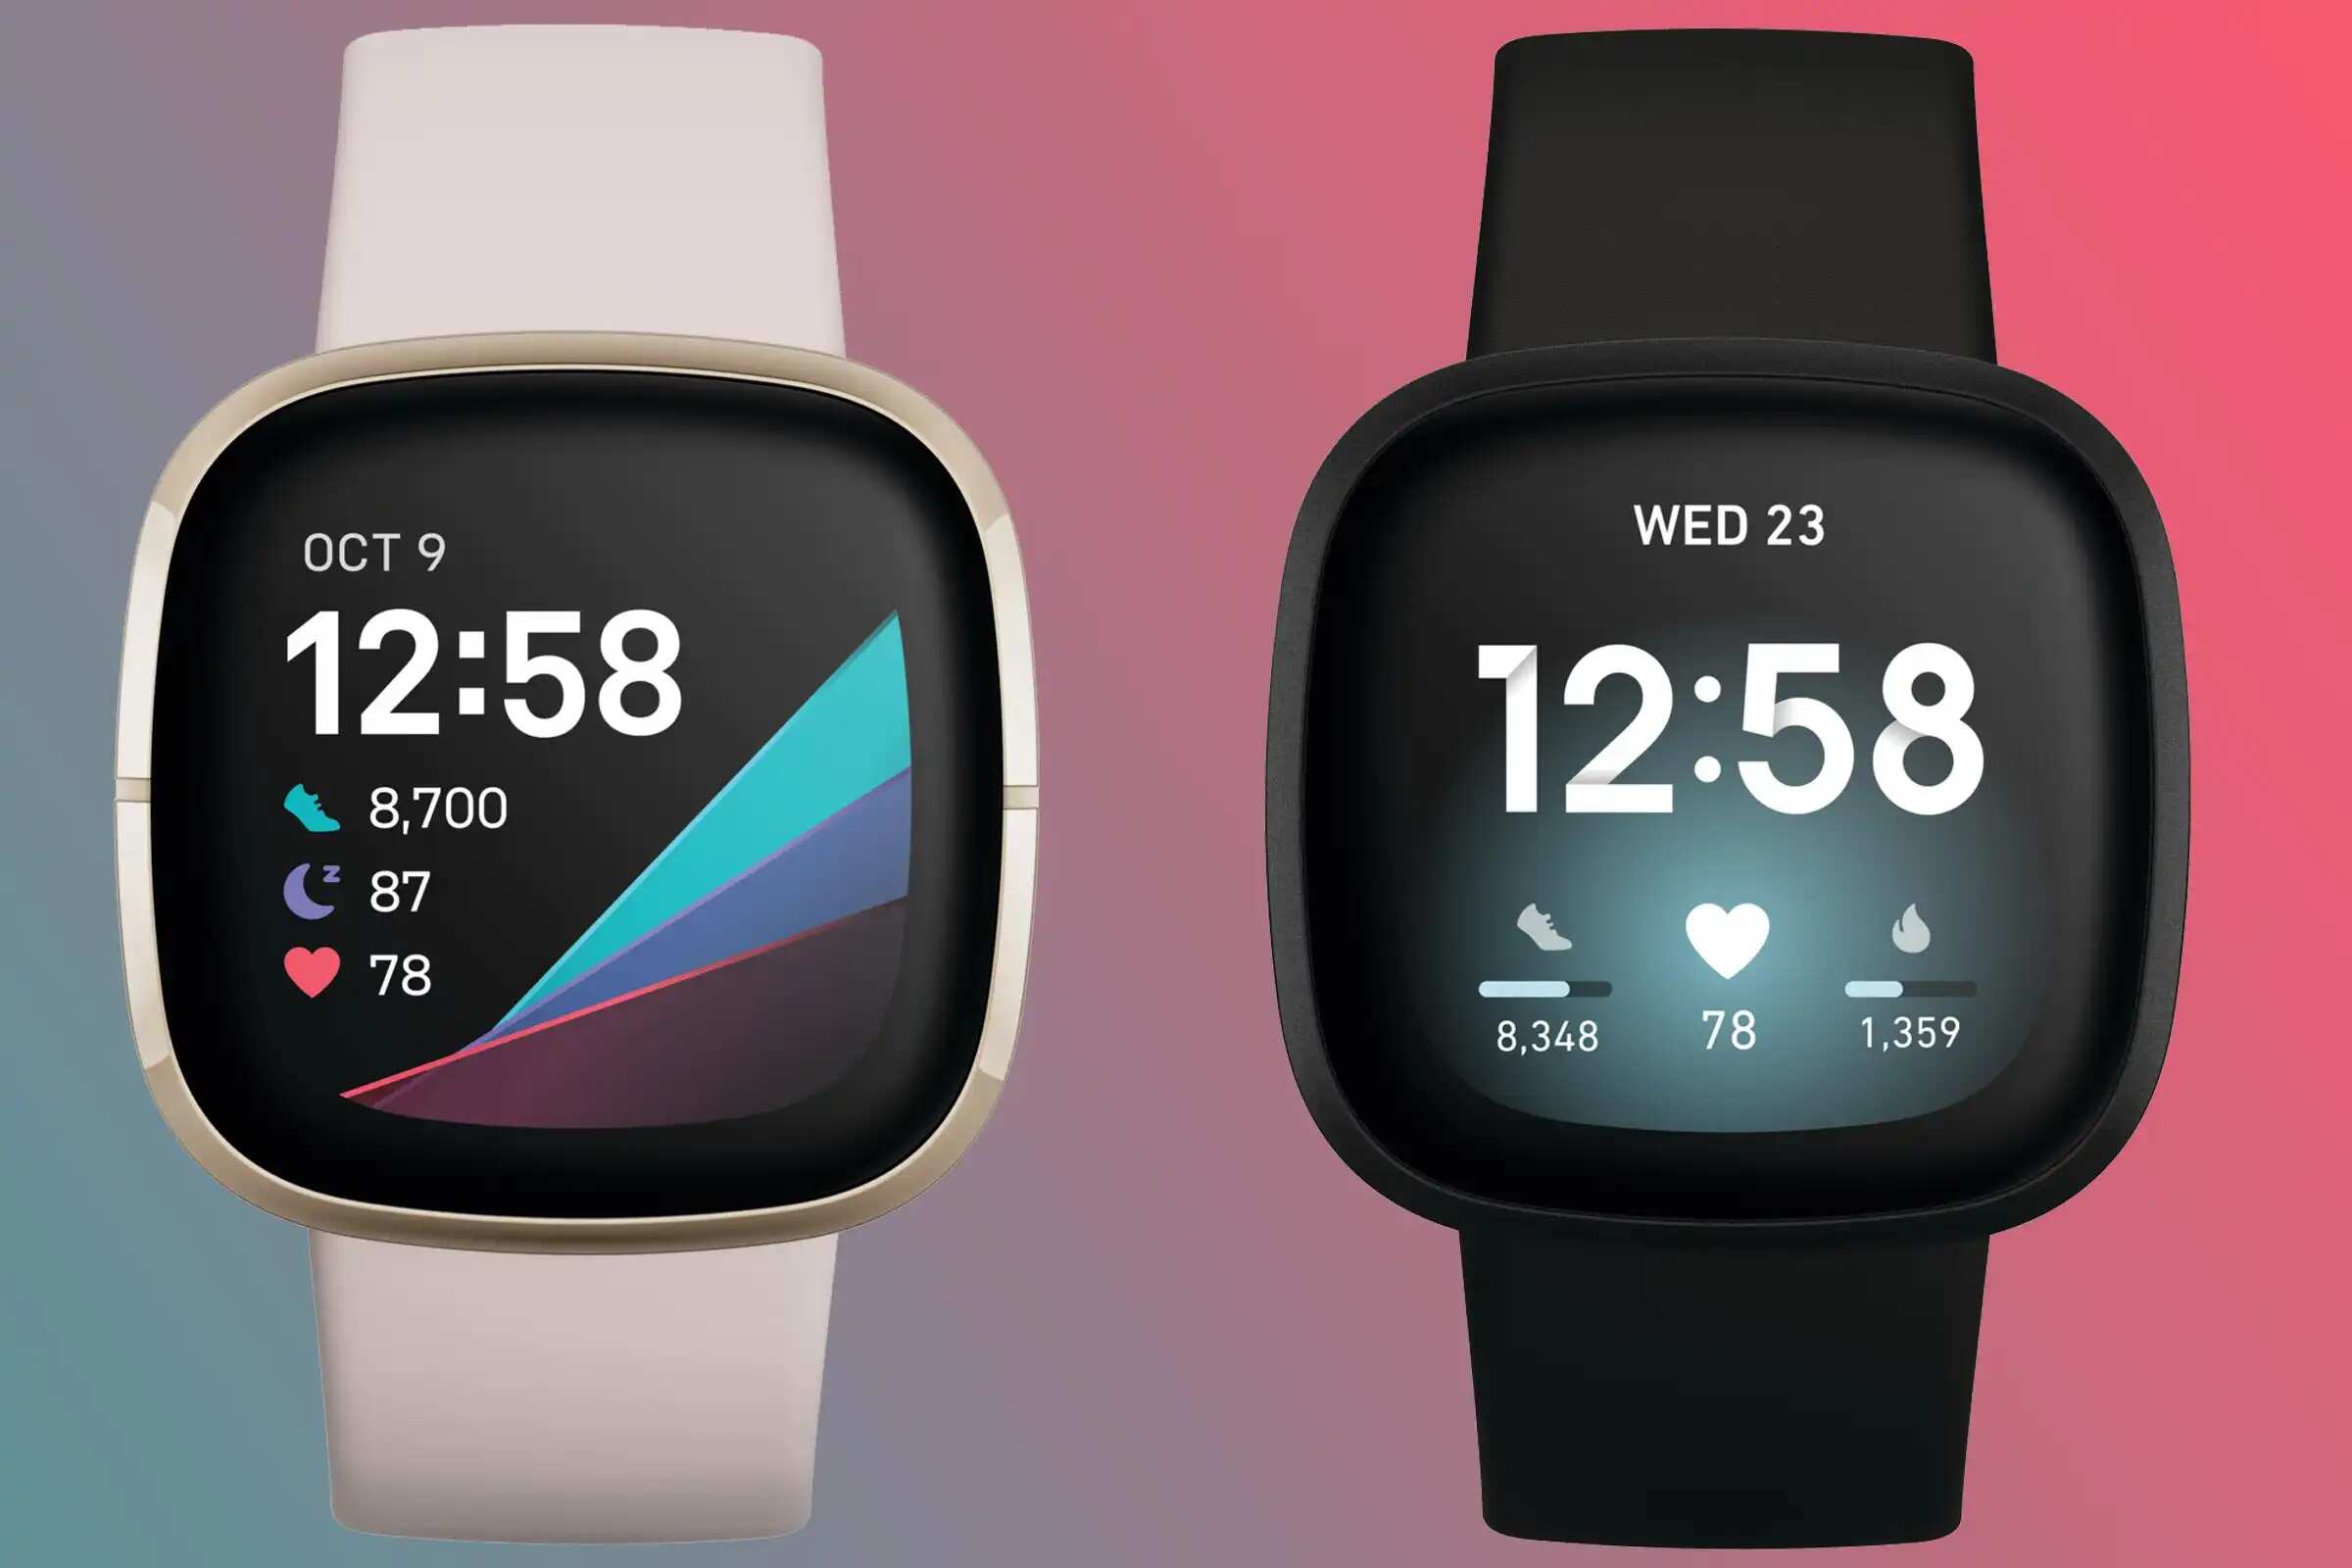 Versa 3 Vs. Sense: Comparing Features To Determine The Better Fitbit